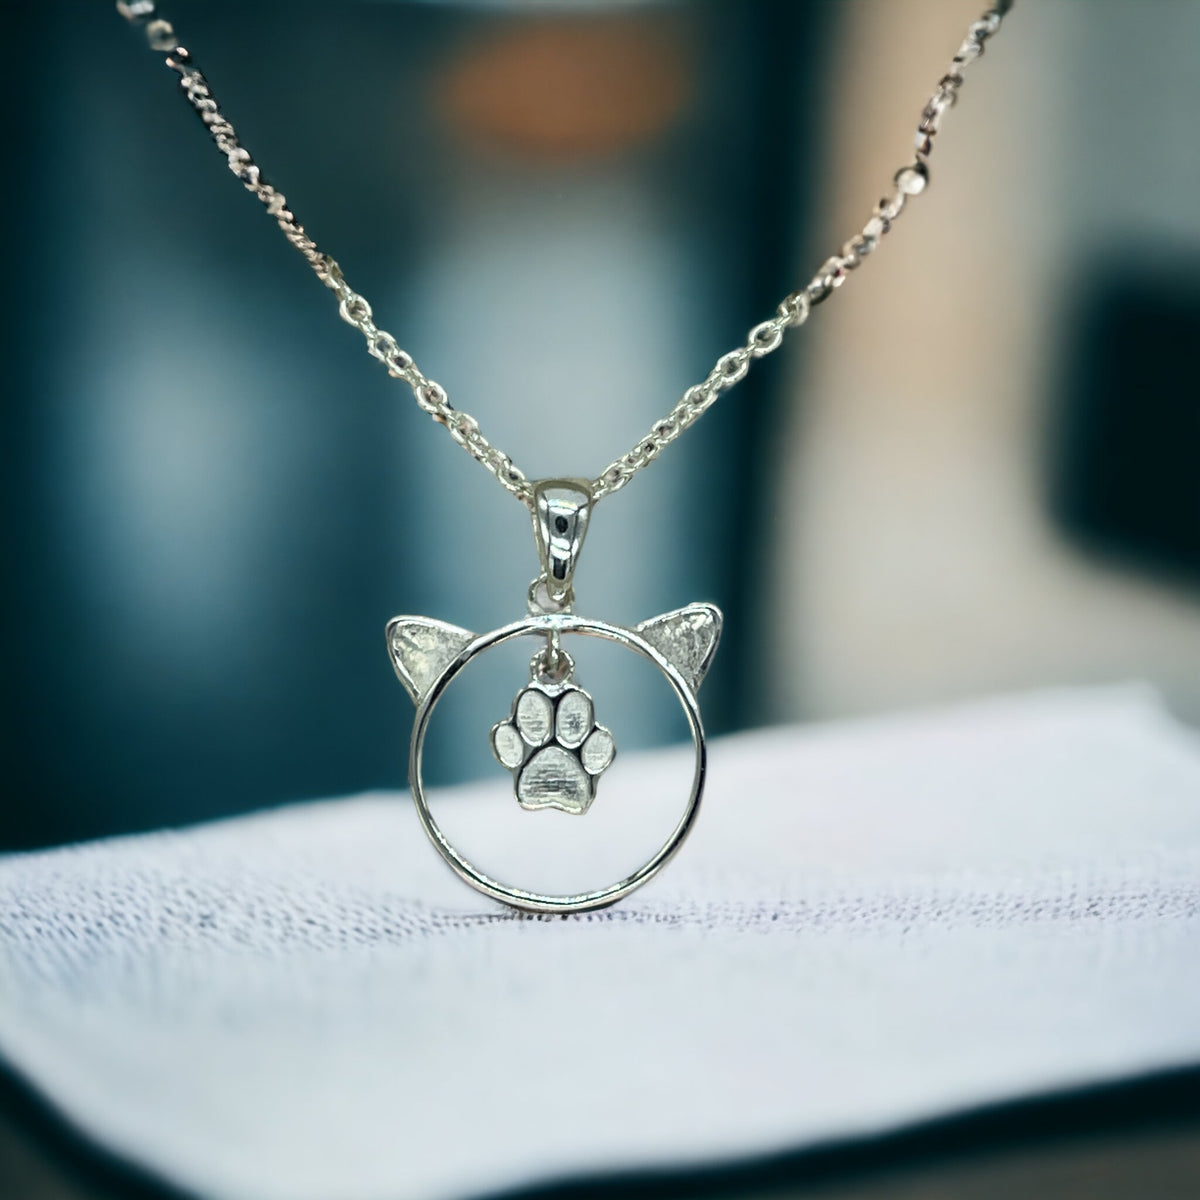 Cat With Paw 925 Sterling Silver Bezel Blank With Chain Keepsake For UV and Epoxy Resin with FREE Gift Box